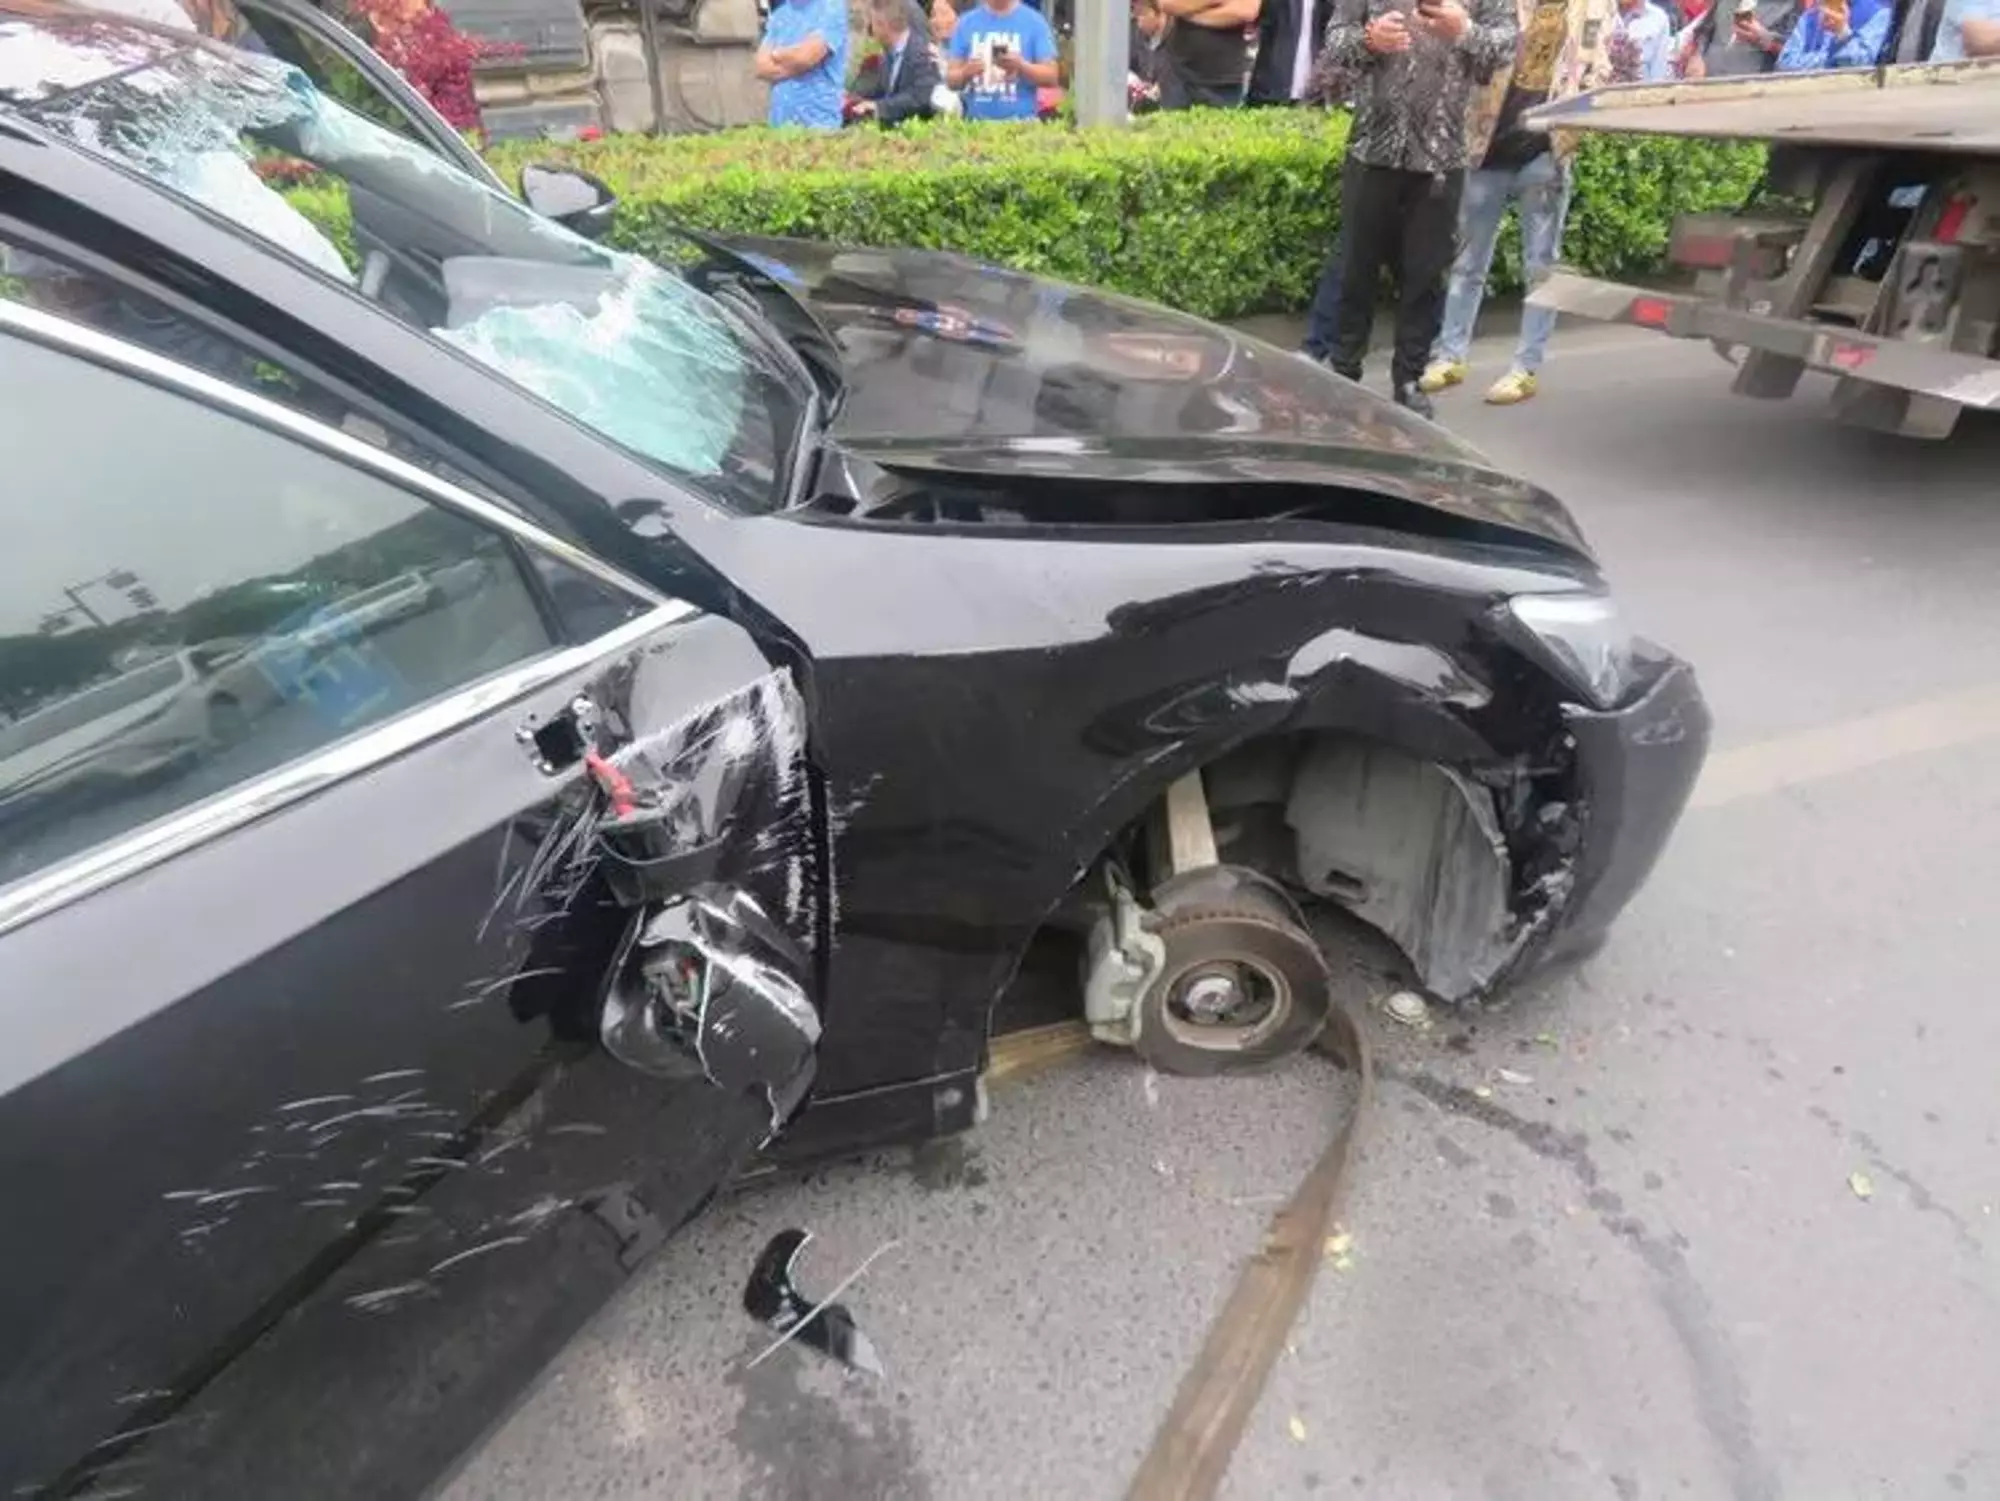 The black Toyota was sent careering off the road and over a traffic island.